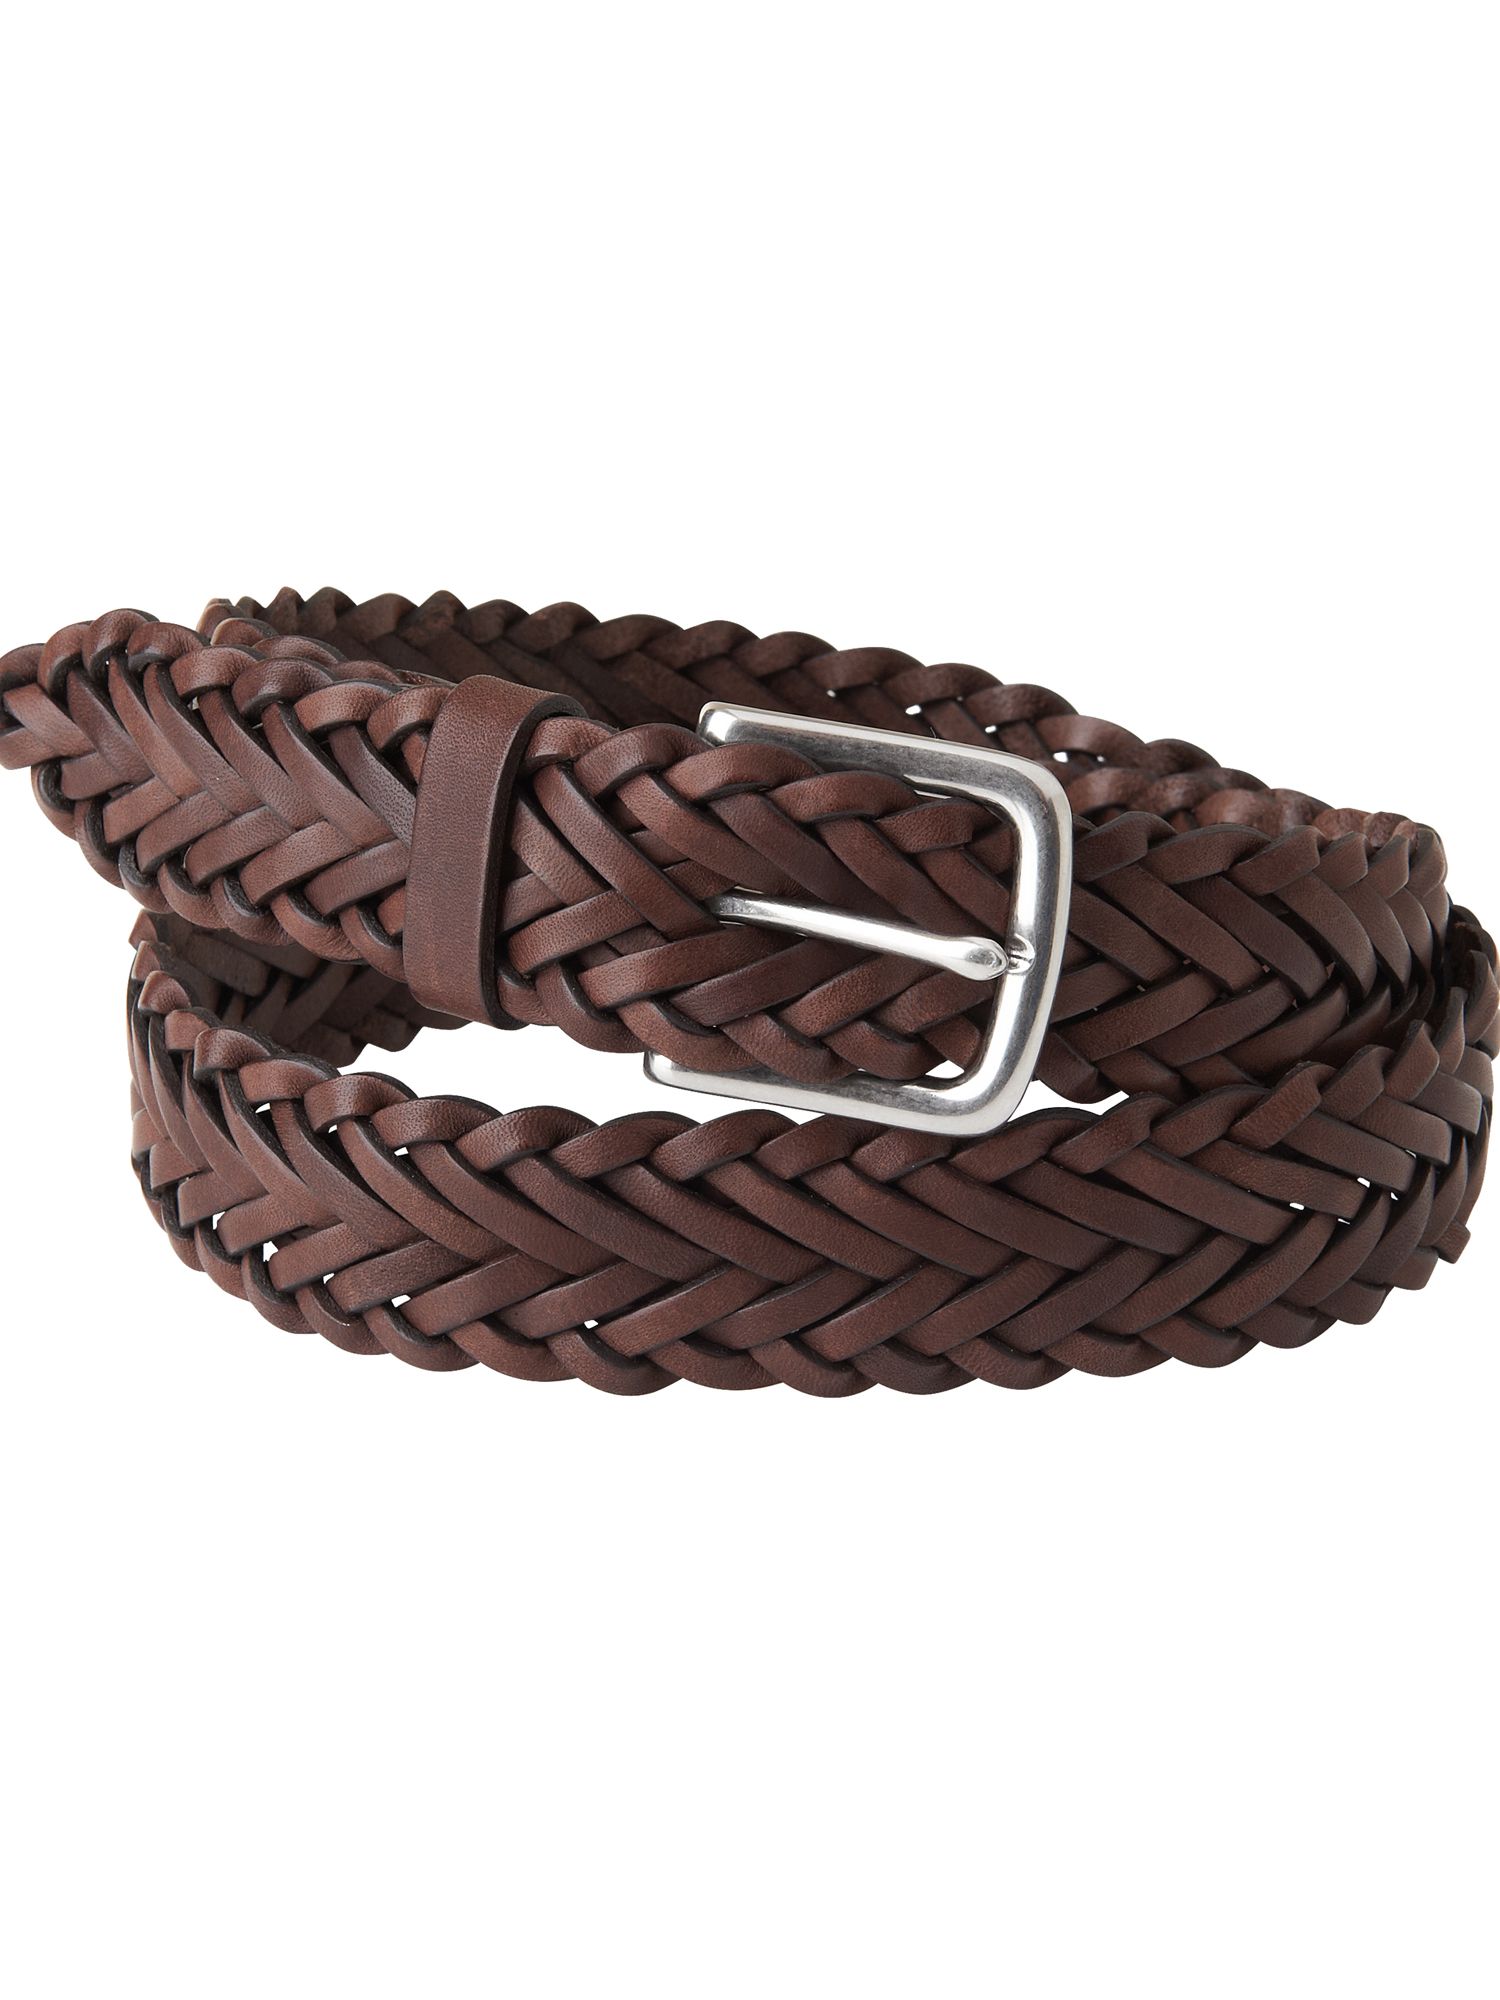 Jaeger Woven Leather Belt in Brown for Men | Lyst